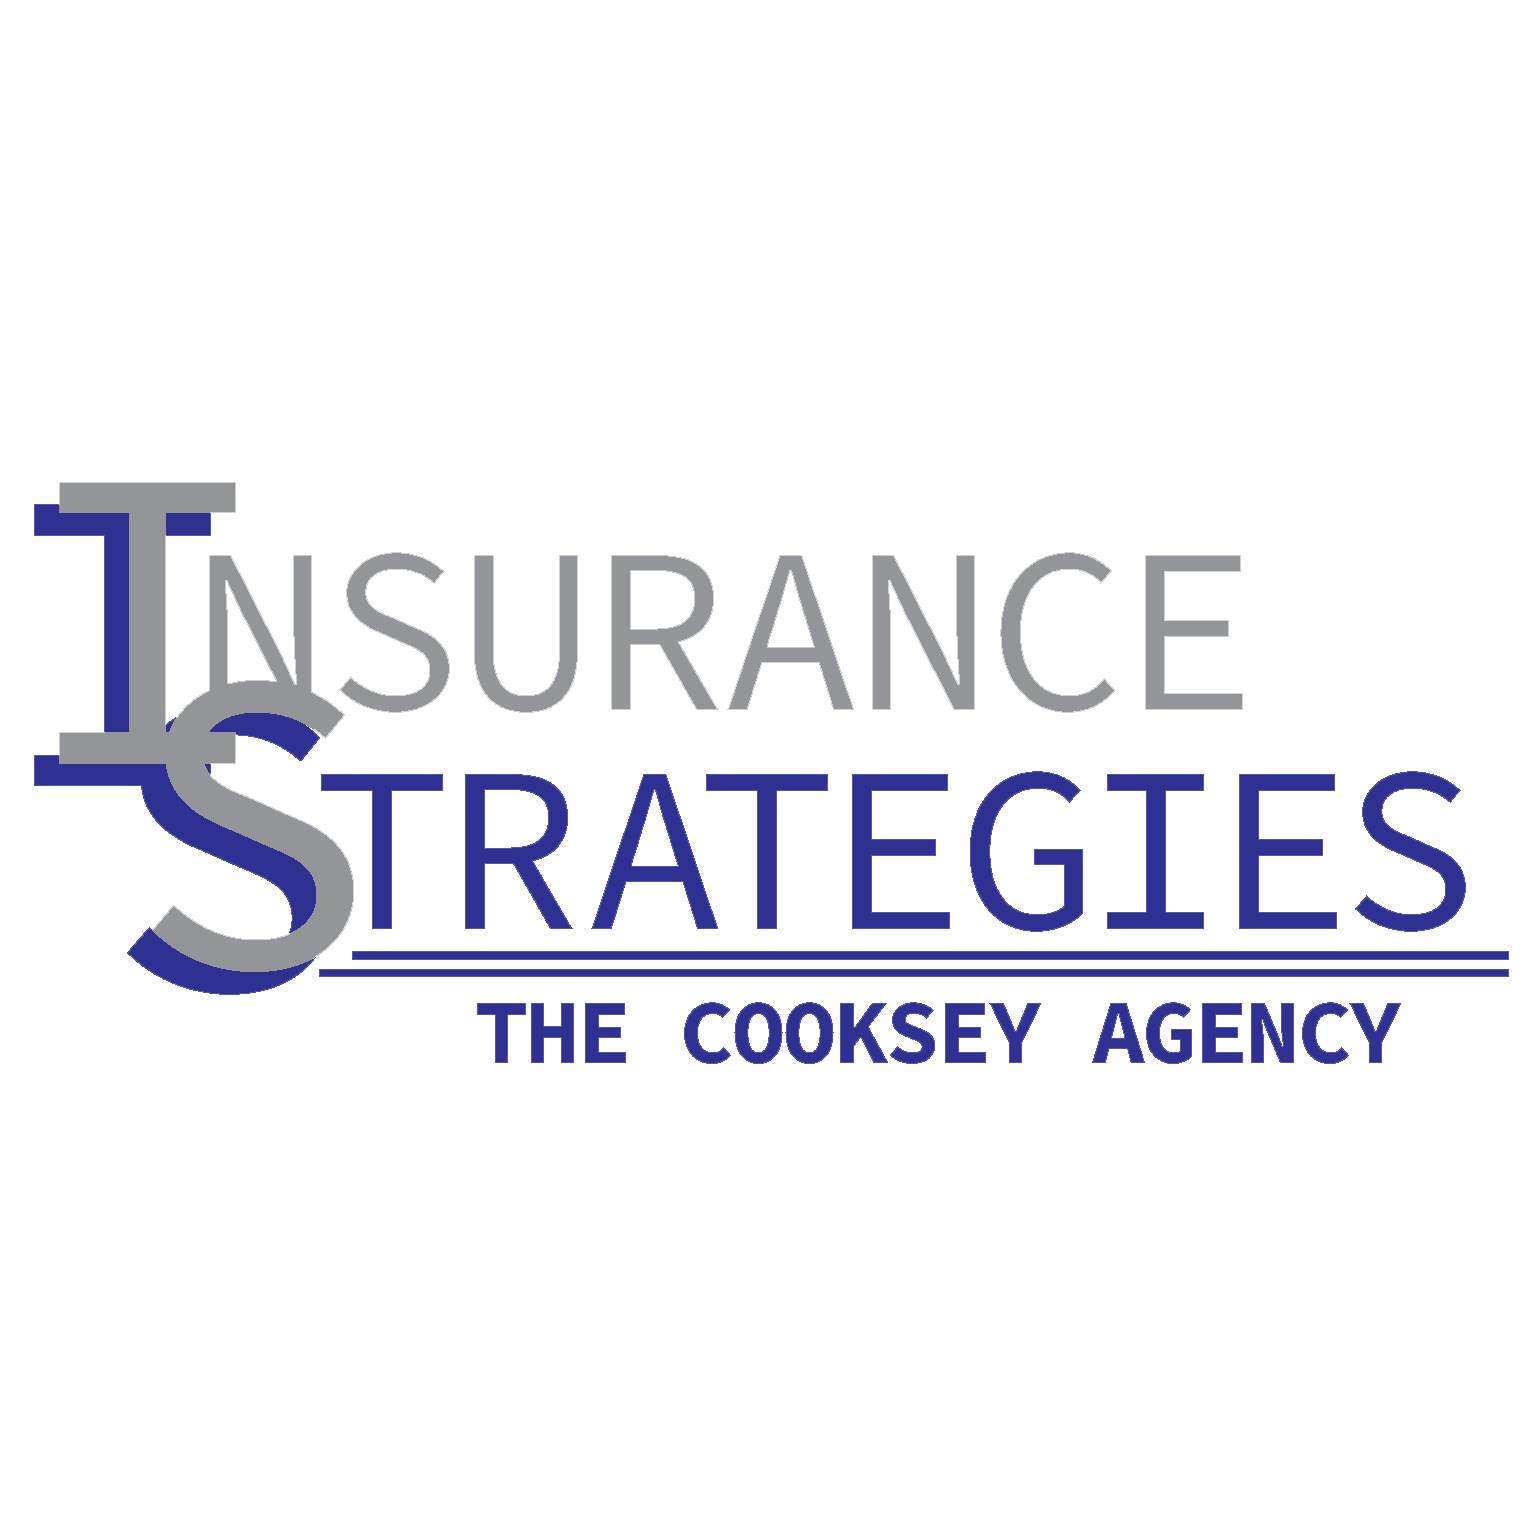 Insurance Strategies The Cooksey Agency Photo